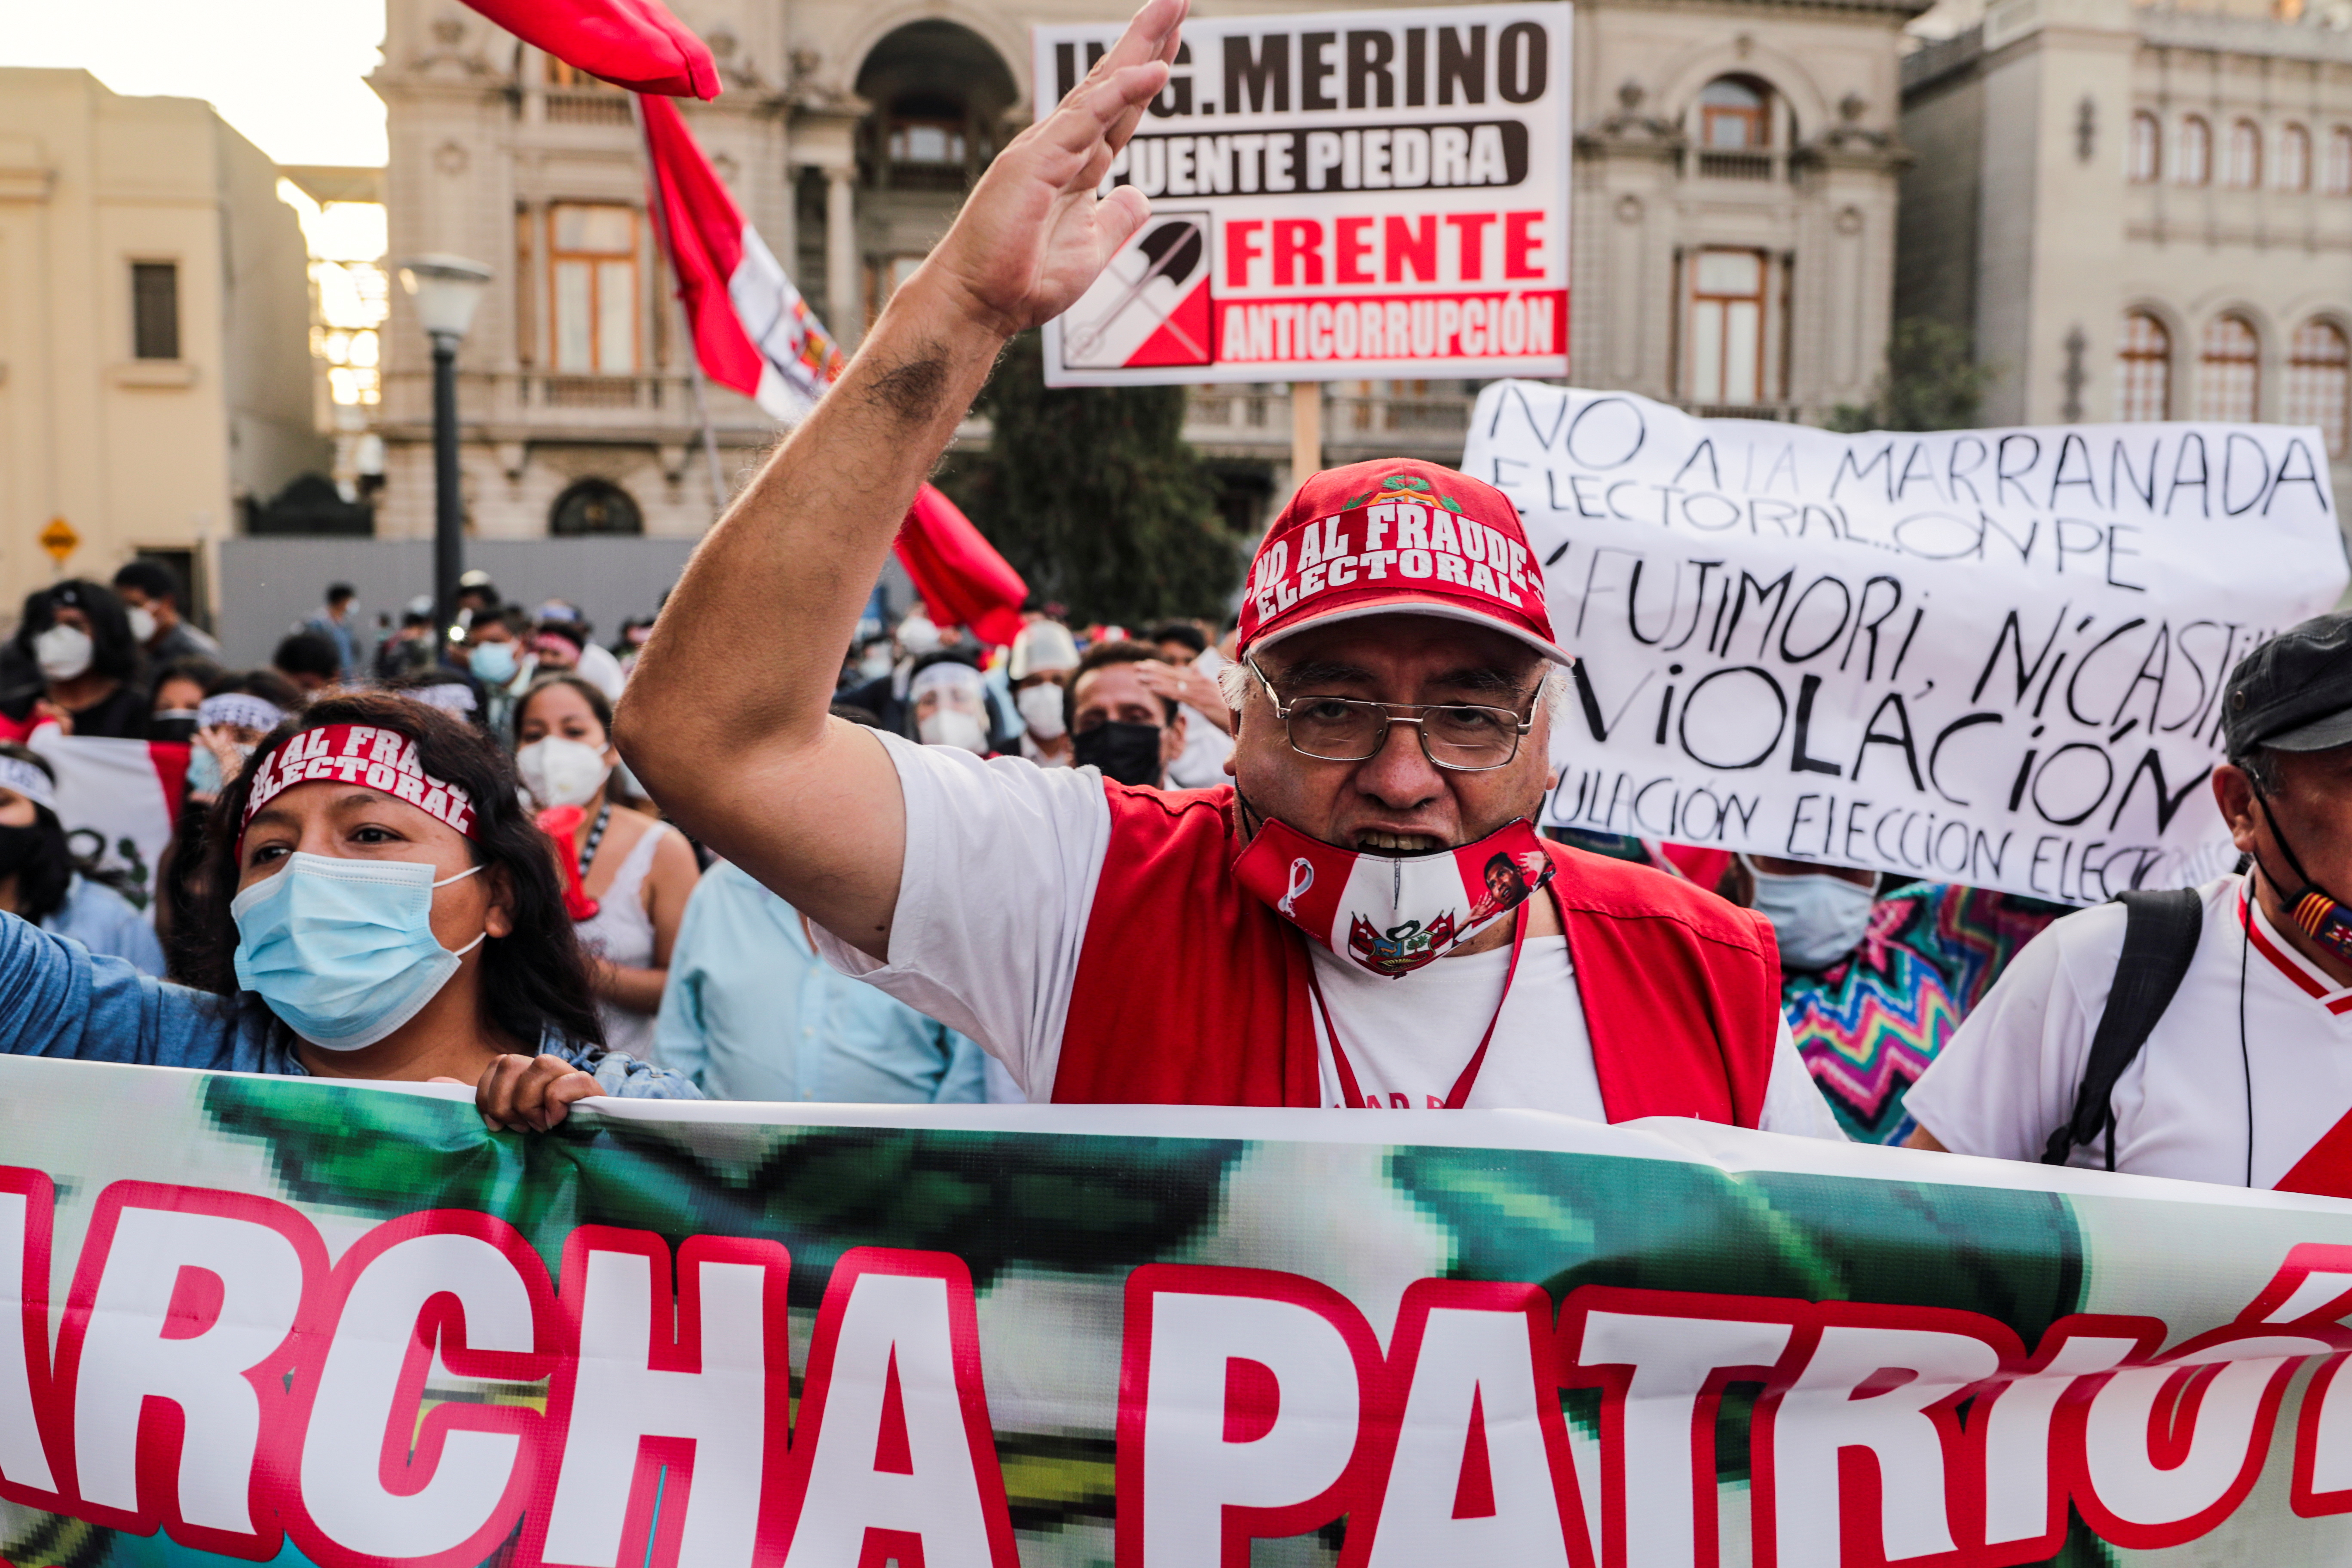 Protest against Peru's presidential candidates Pedro Castillo and Keiko Fujimori, who will face each other in the second round of the presidential election, in Lima, Peru